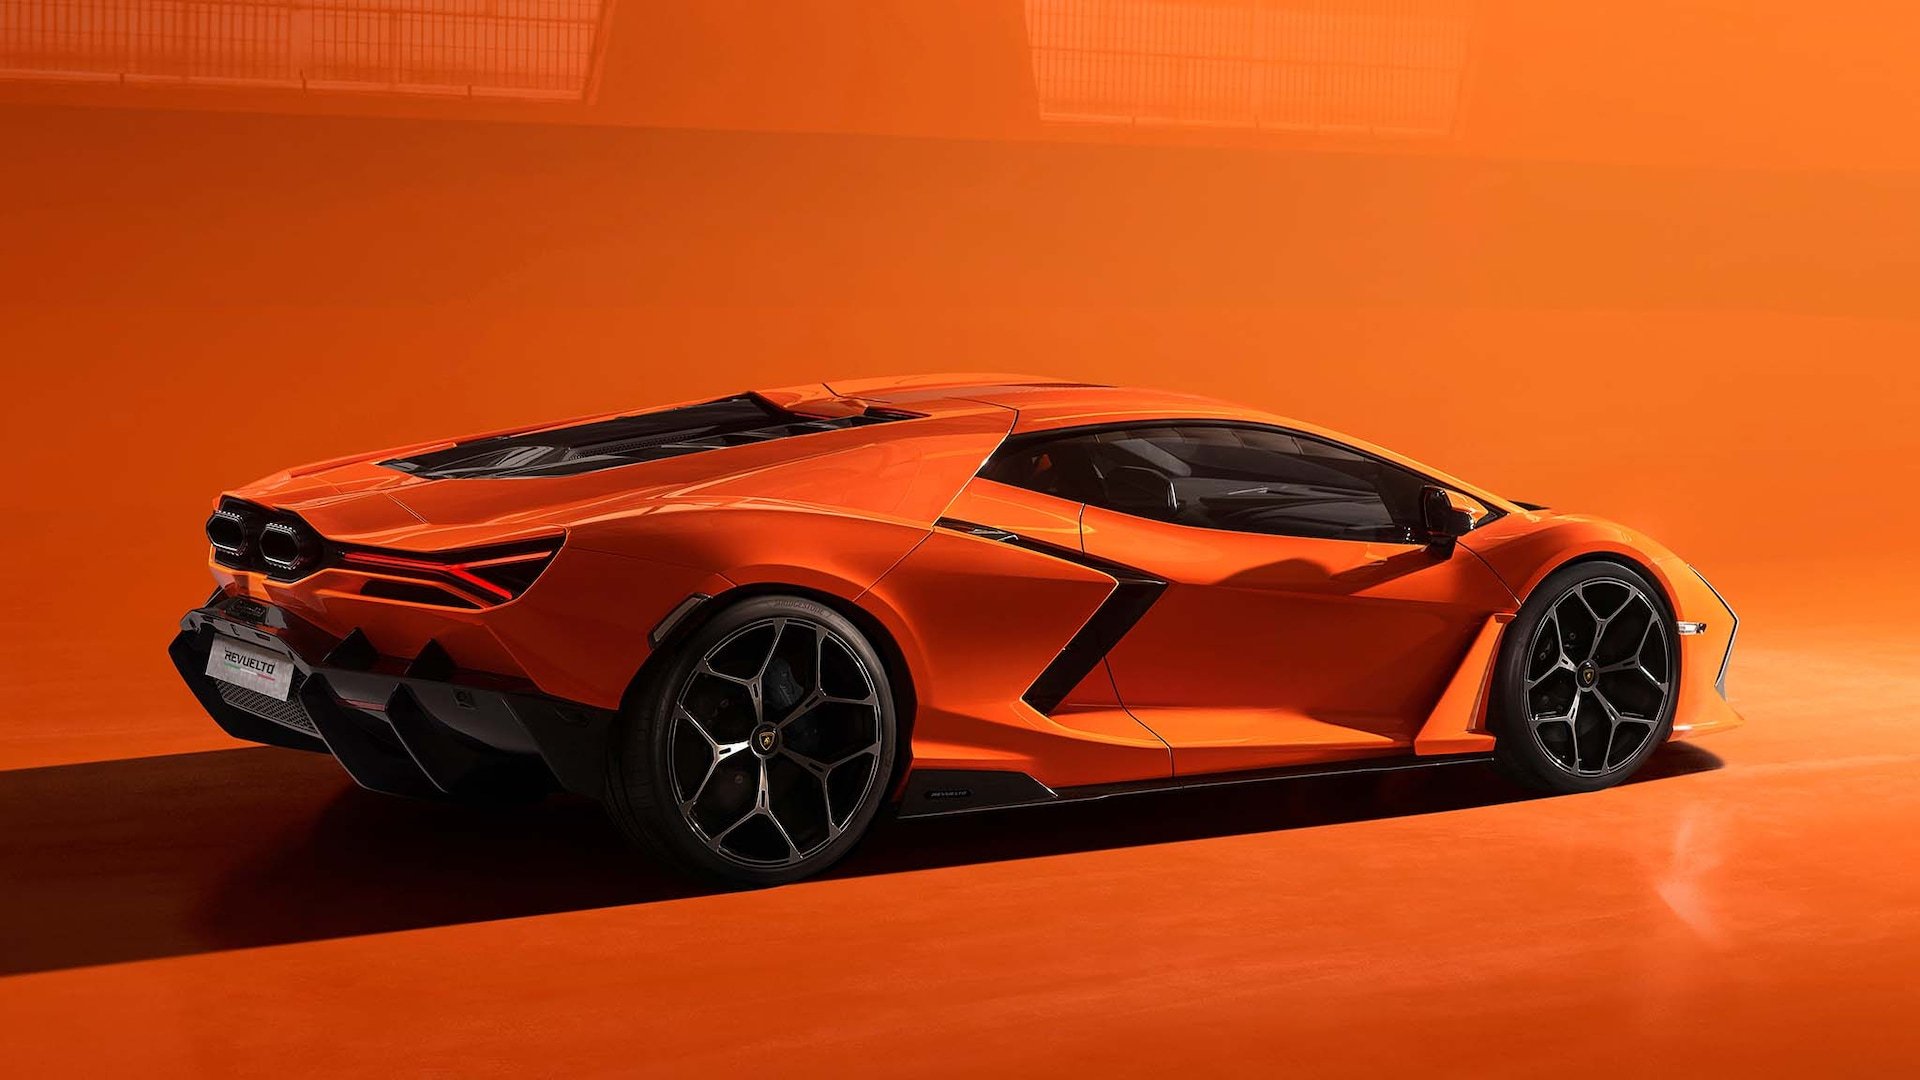 First Look: Lamborghini Revuelto Is the Hybrid Hypercar to Replace Aventador